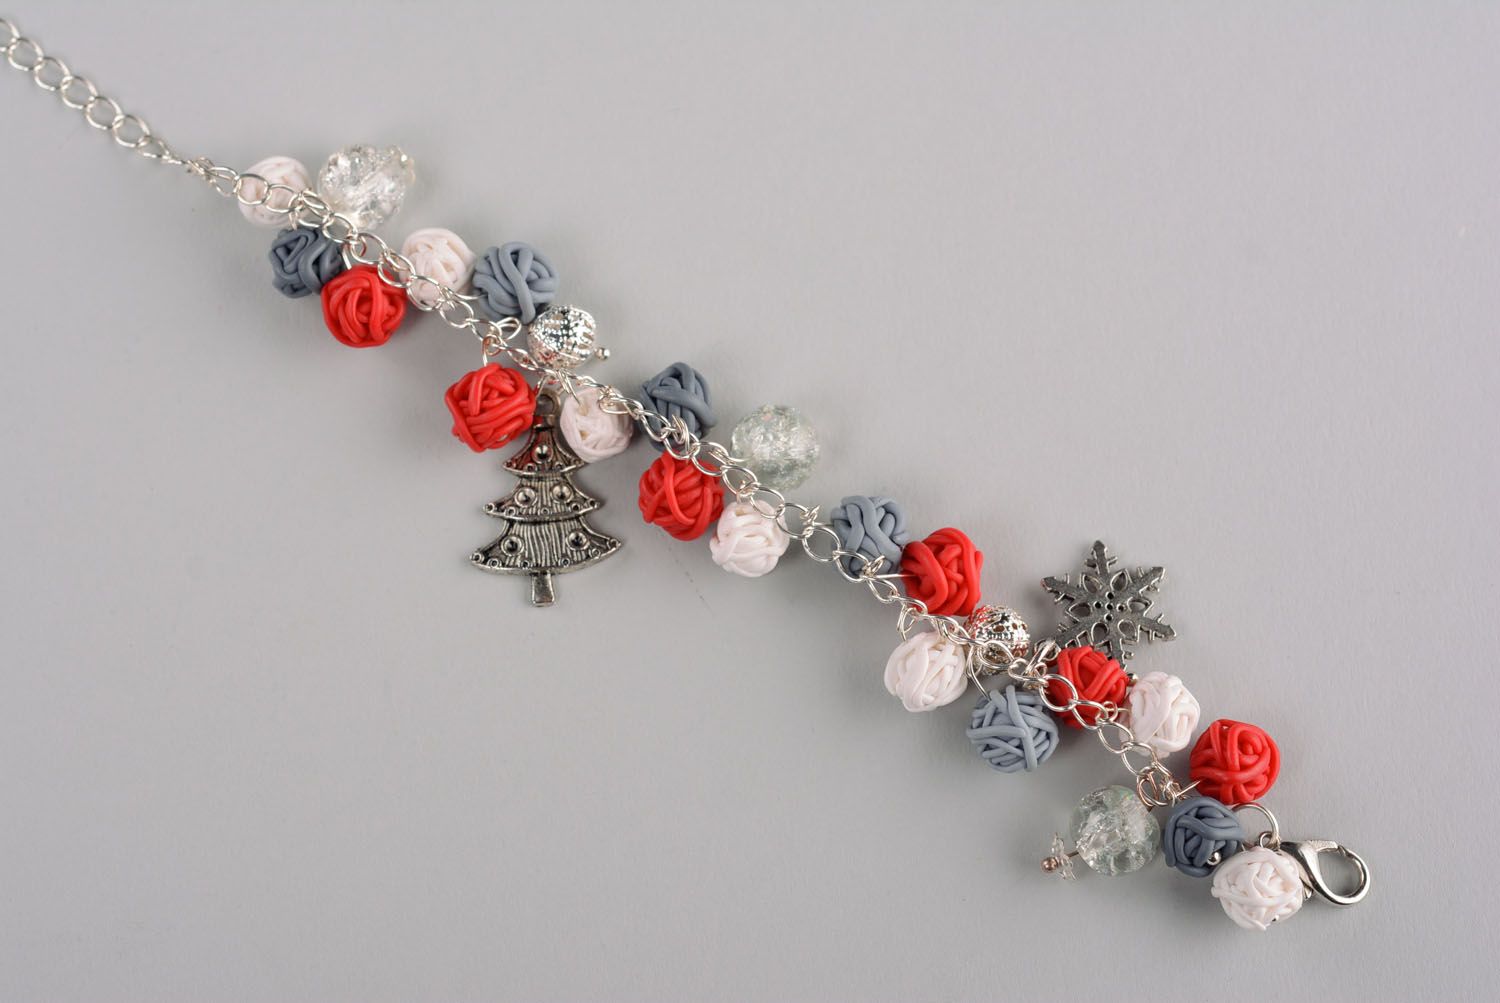 New Year's bracelet with charms photo 1